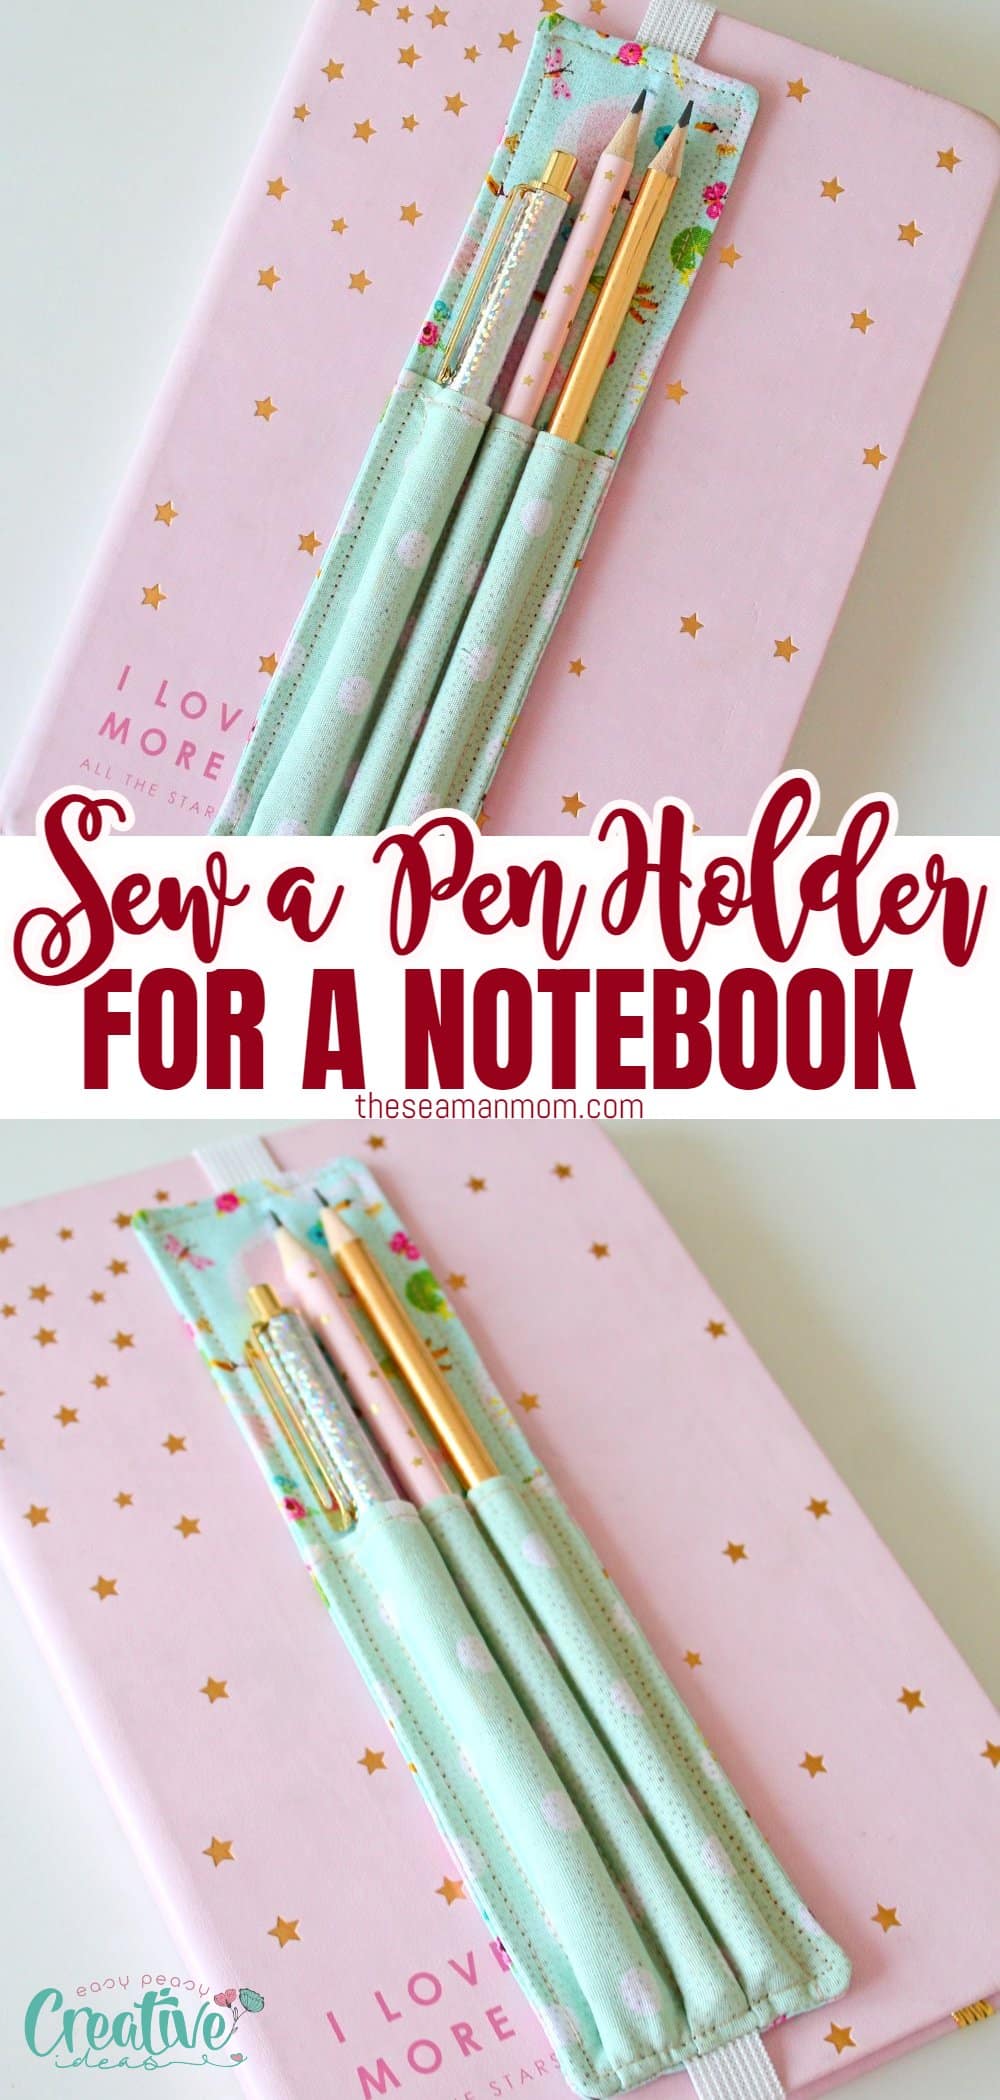 Learn how to sew a functional DIY pen holder for your journal or notebook, ensuring you always have a writing utensil readily available for capturing your thoughts and ideas. via @petroneagu